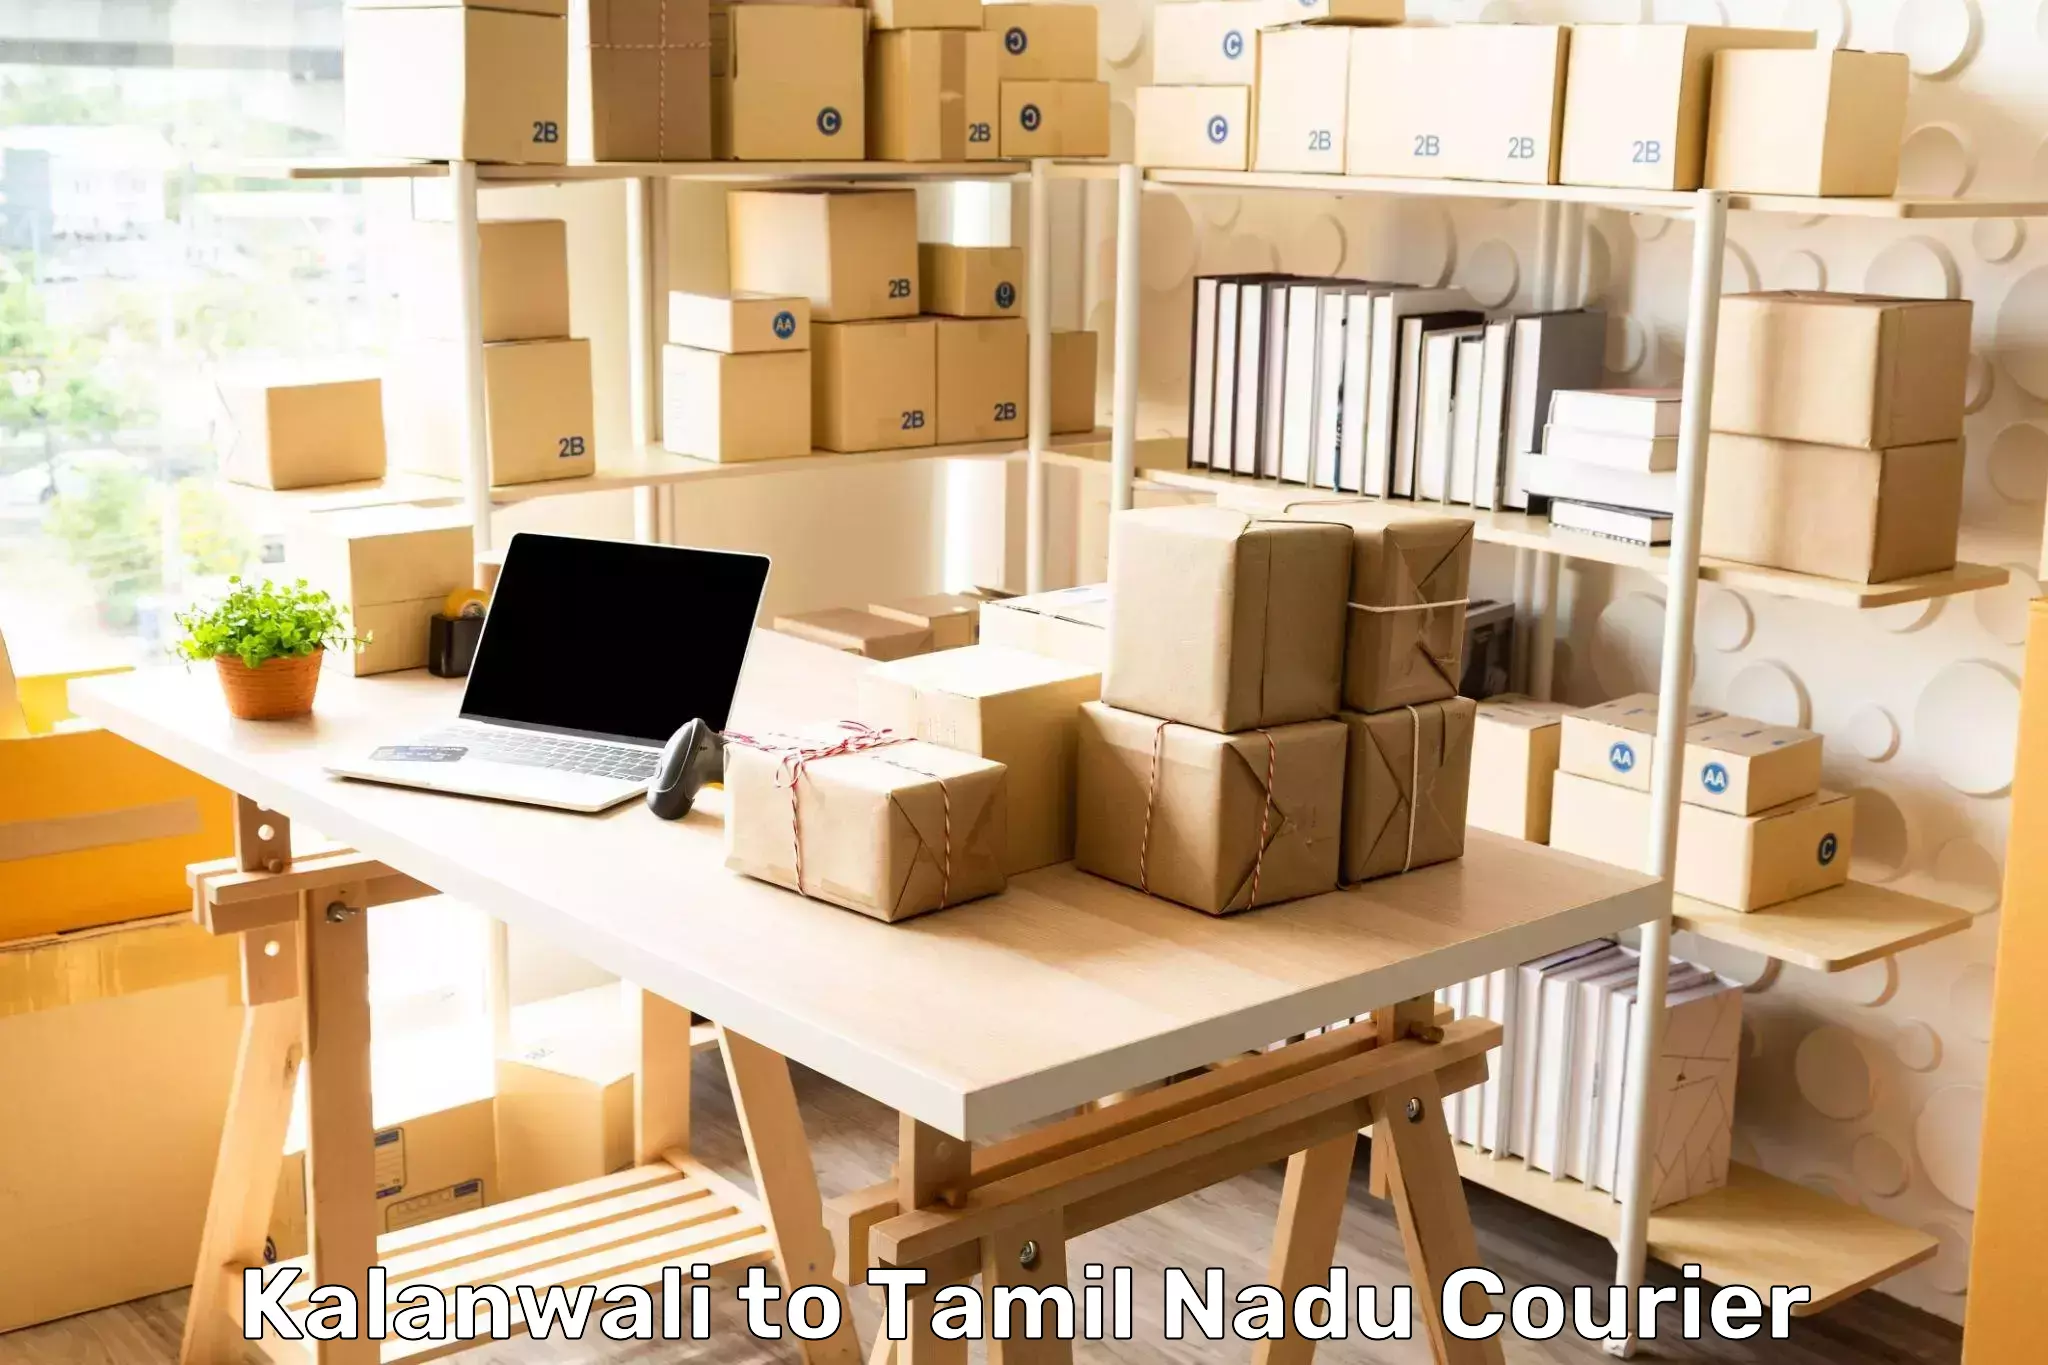 Courier service partnerships in Kalanwali to Meenakshi Academy of Higher Education and Research Chennai